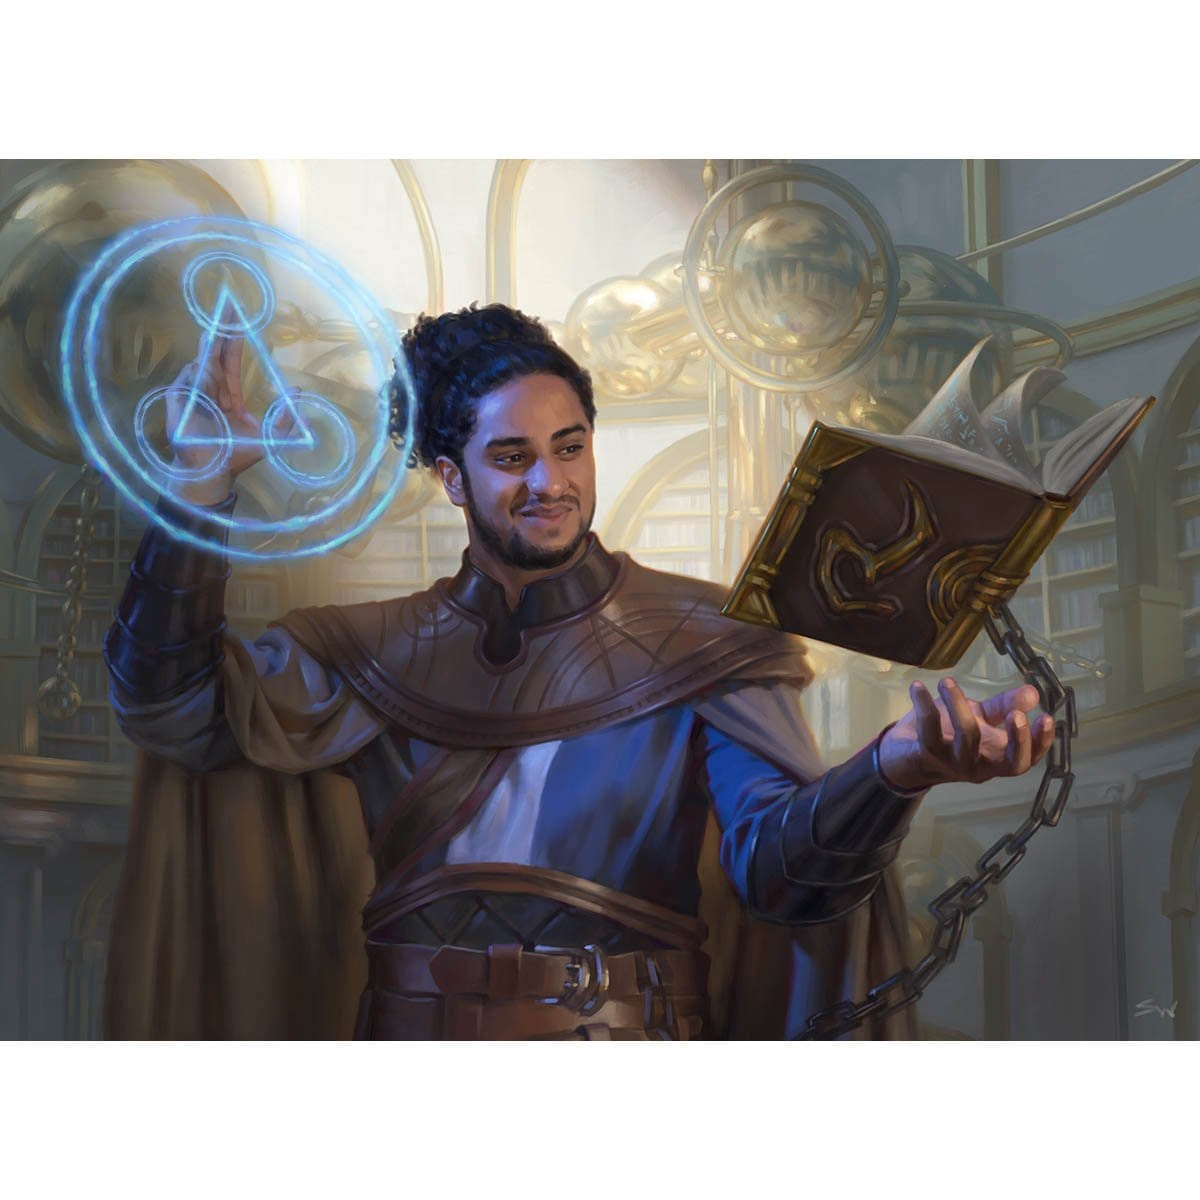 Tolarian Scholar Print - Print - Original Magic Art - Accessories for Magic the Gathering and other card games